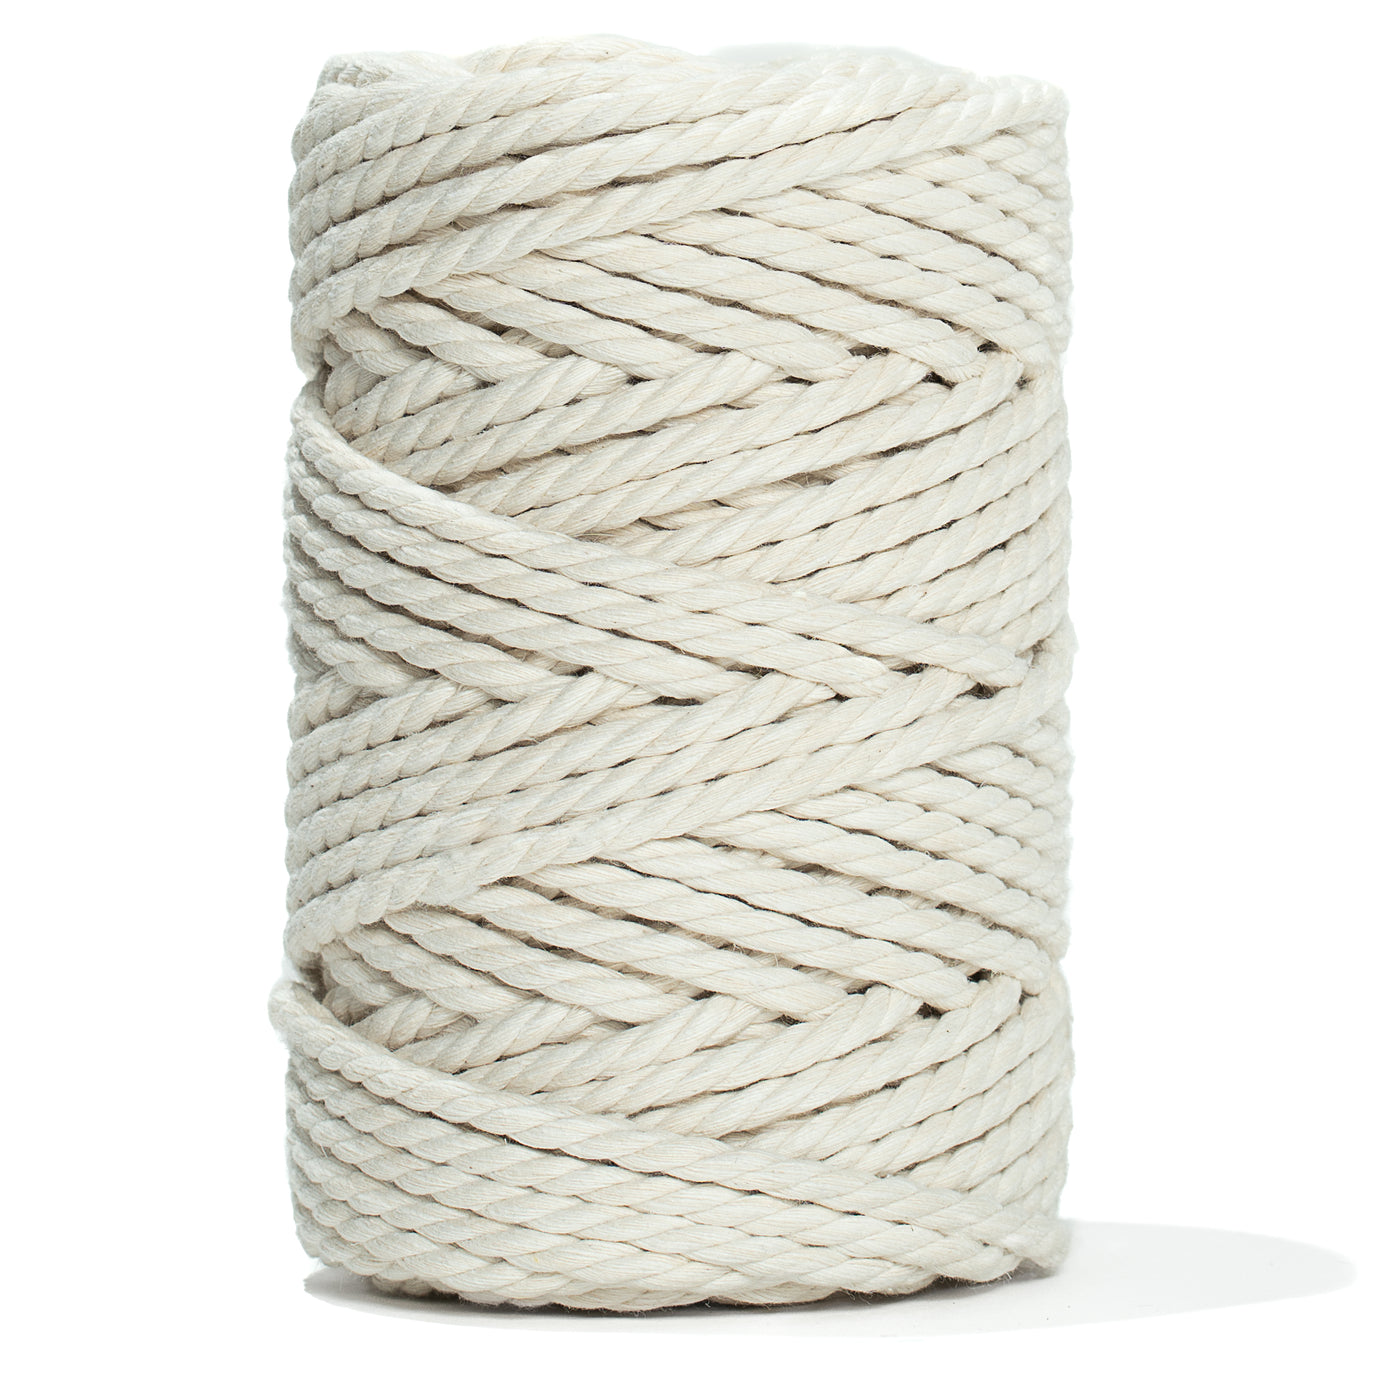 COTTON ROPE ZERO WASTE 4 MM - 3 PLY - NATURAL COLOR 175 ft